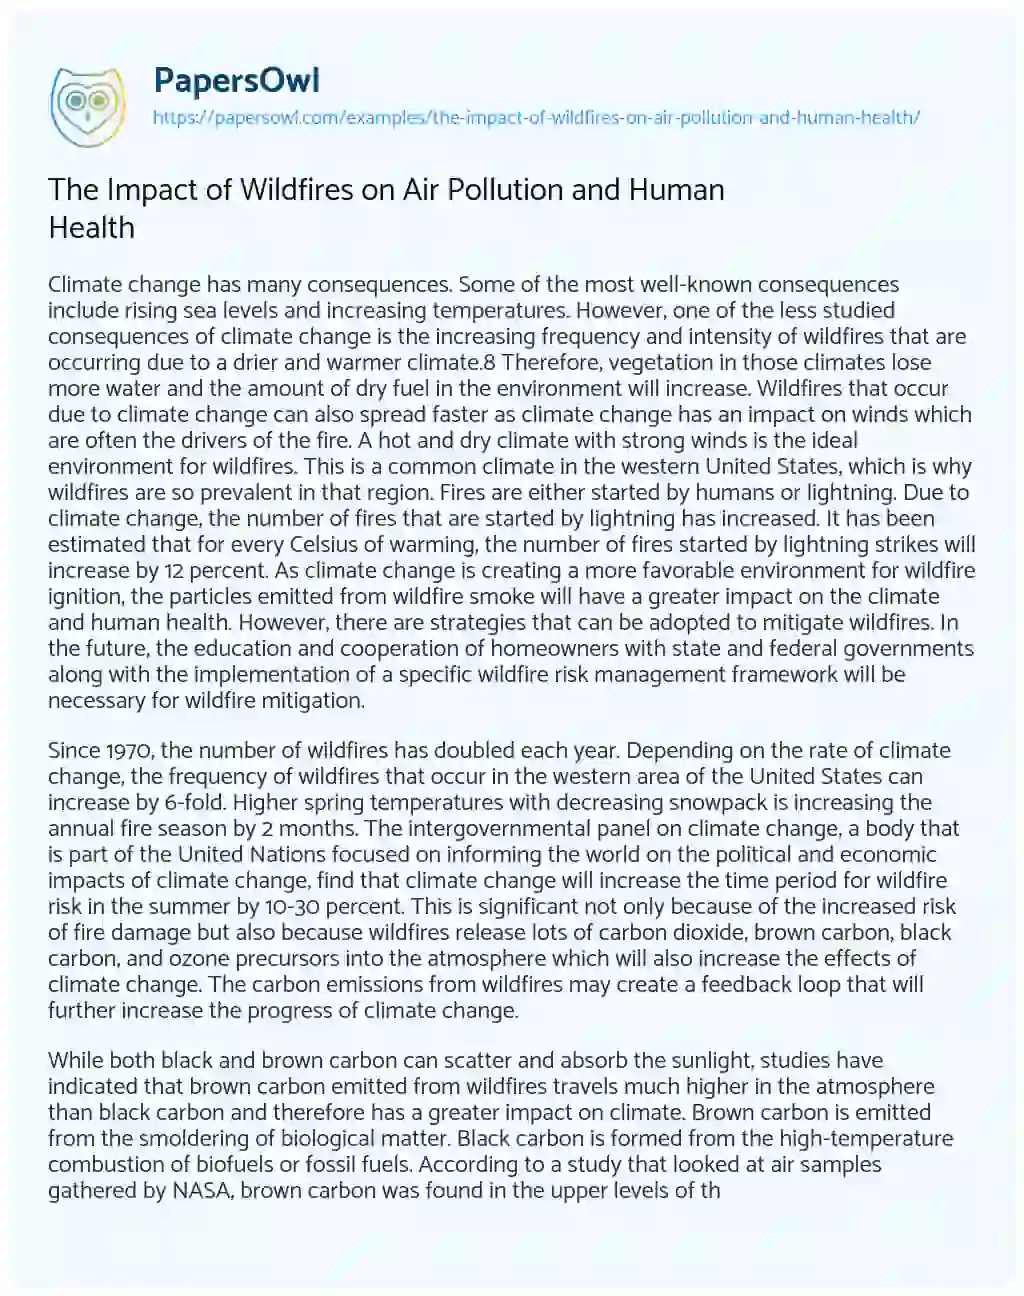 The Impact of Wildfires on Air Pollution and Human Health essay